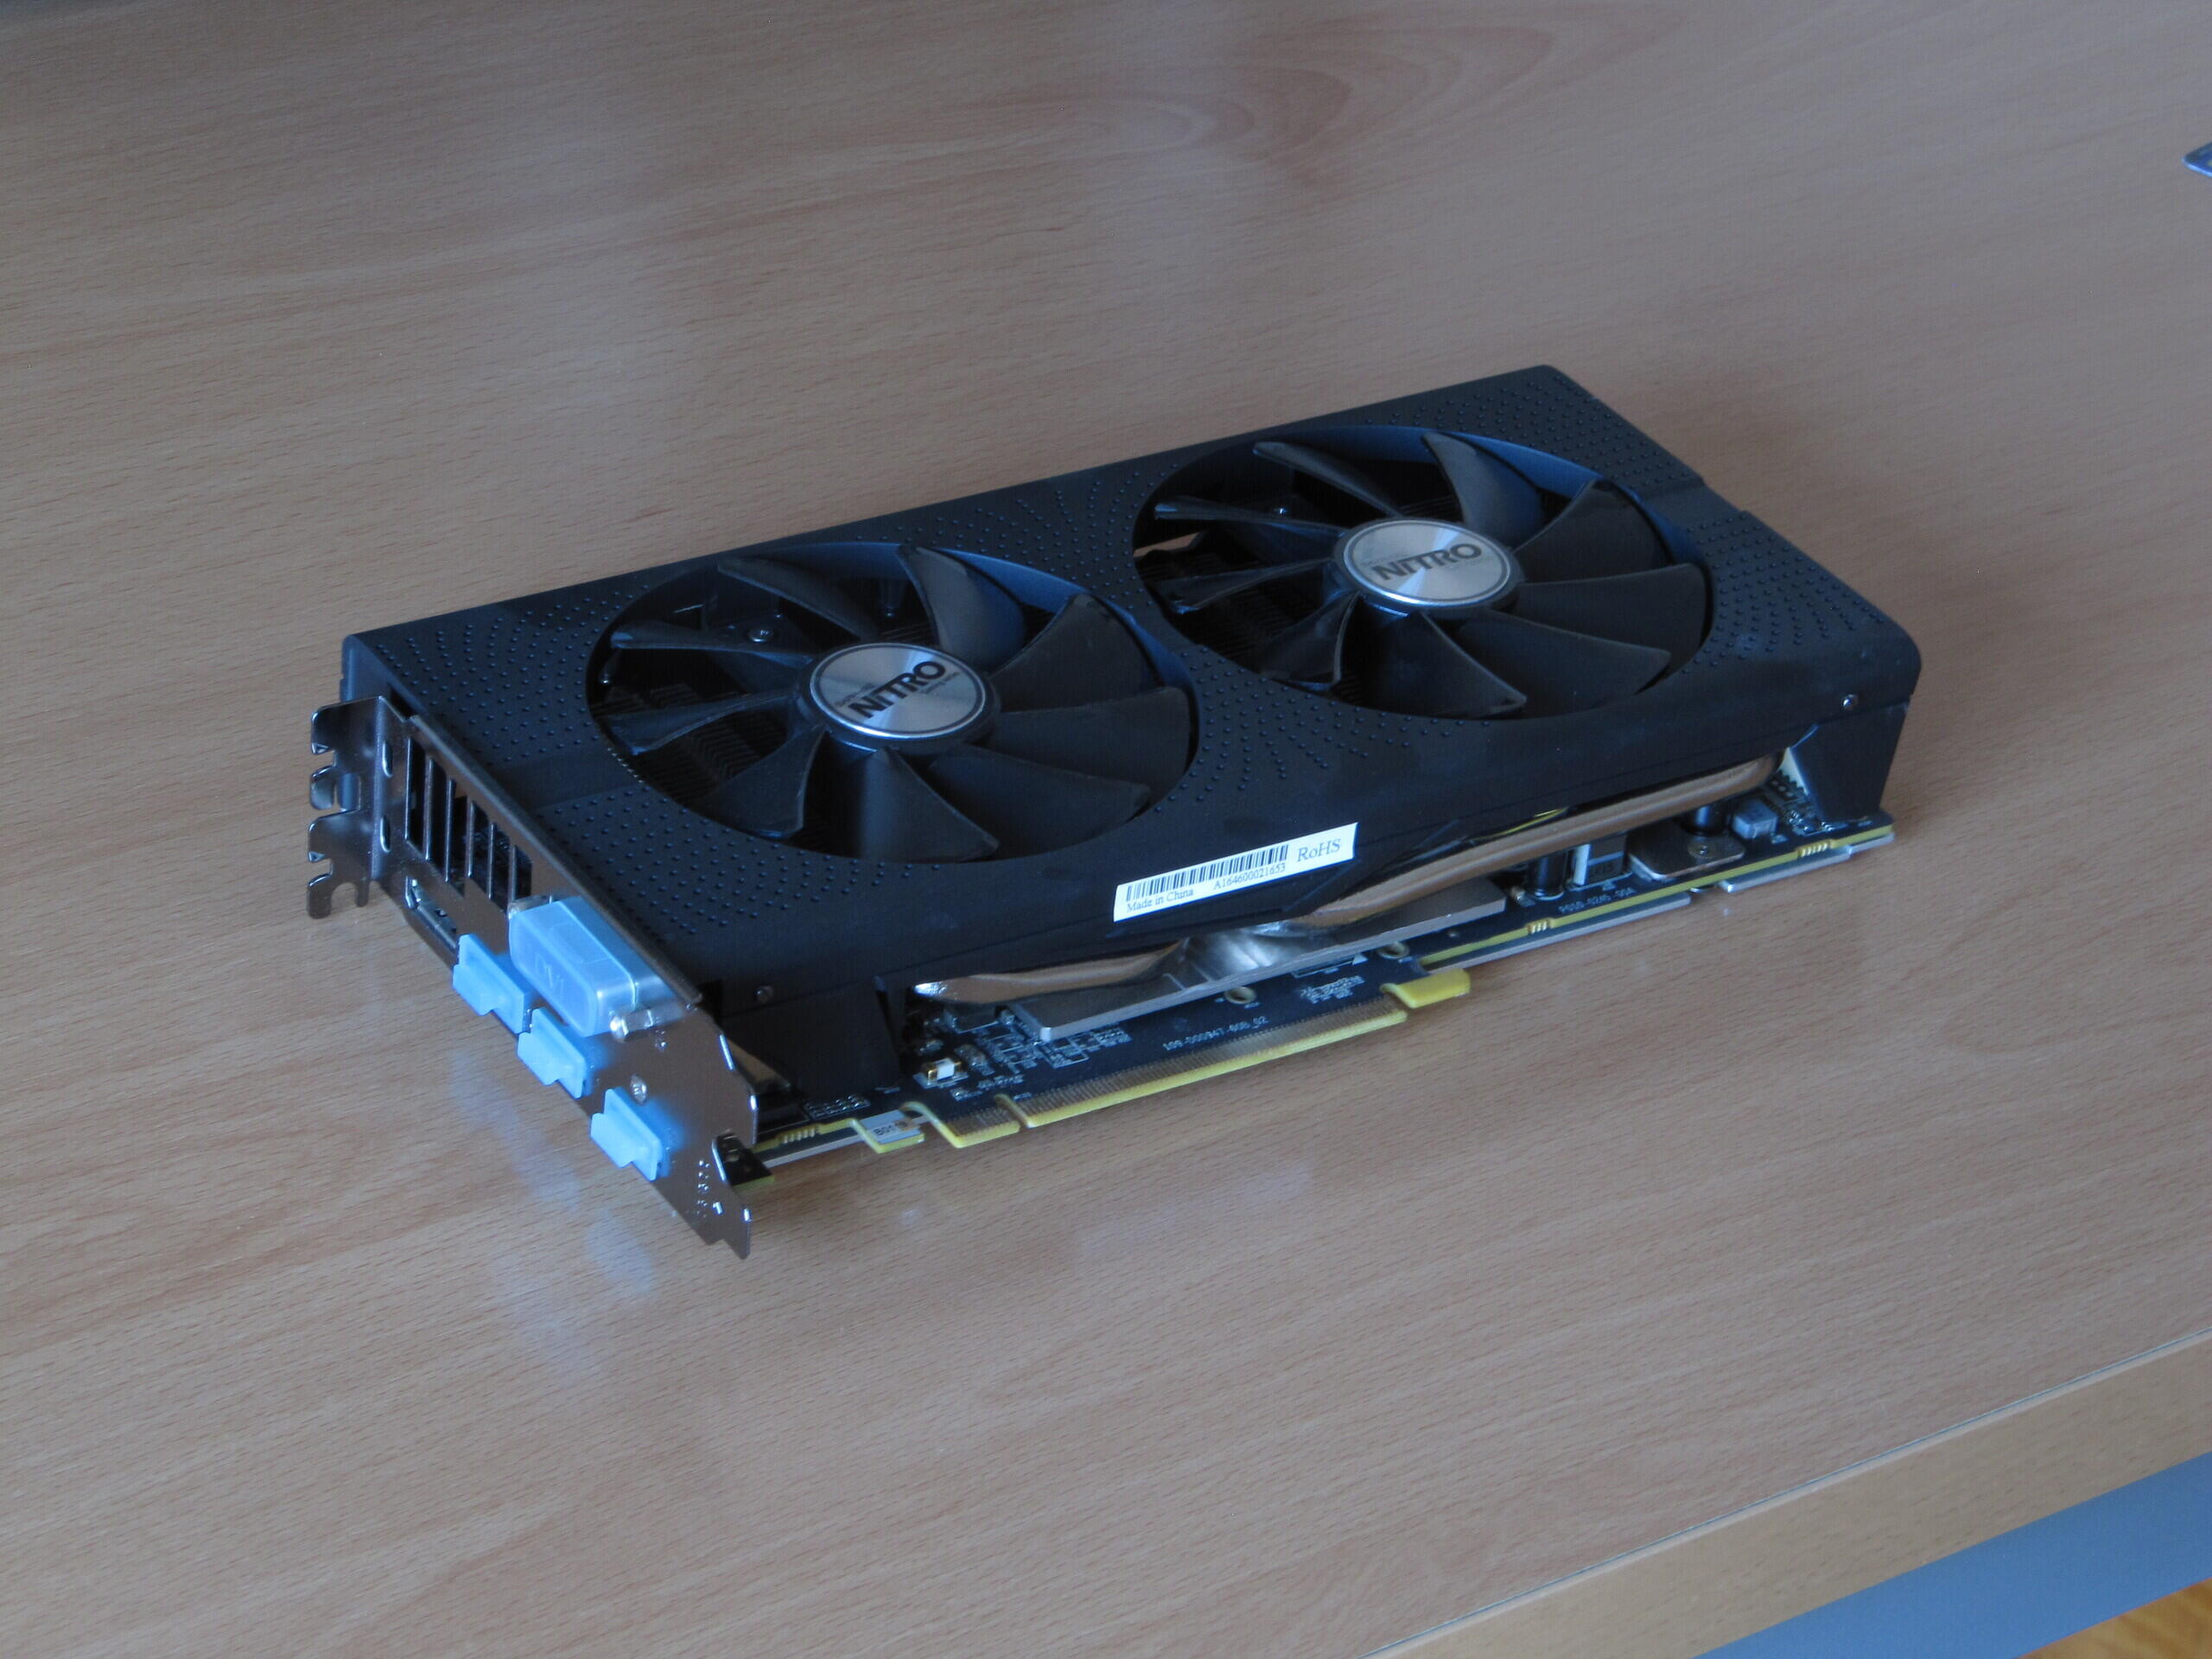 The RX 480 in its original form.